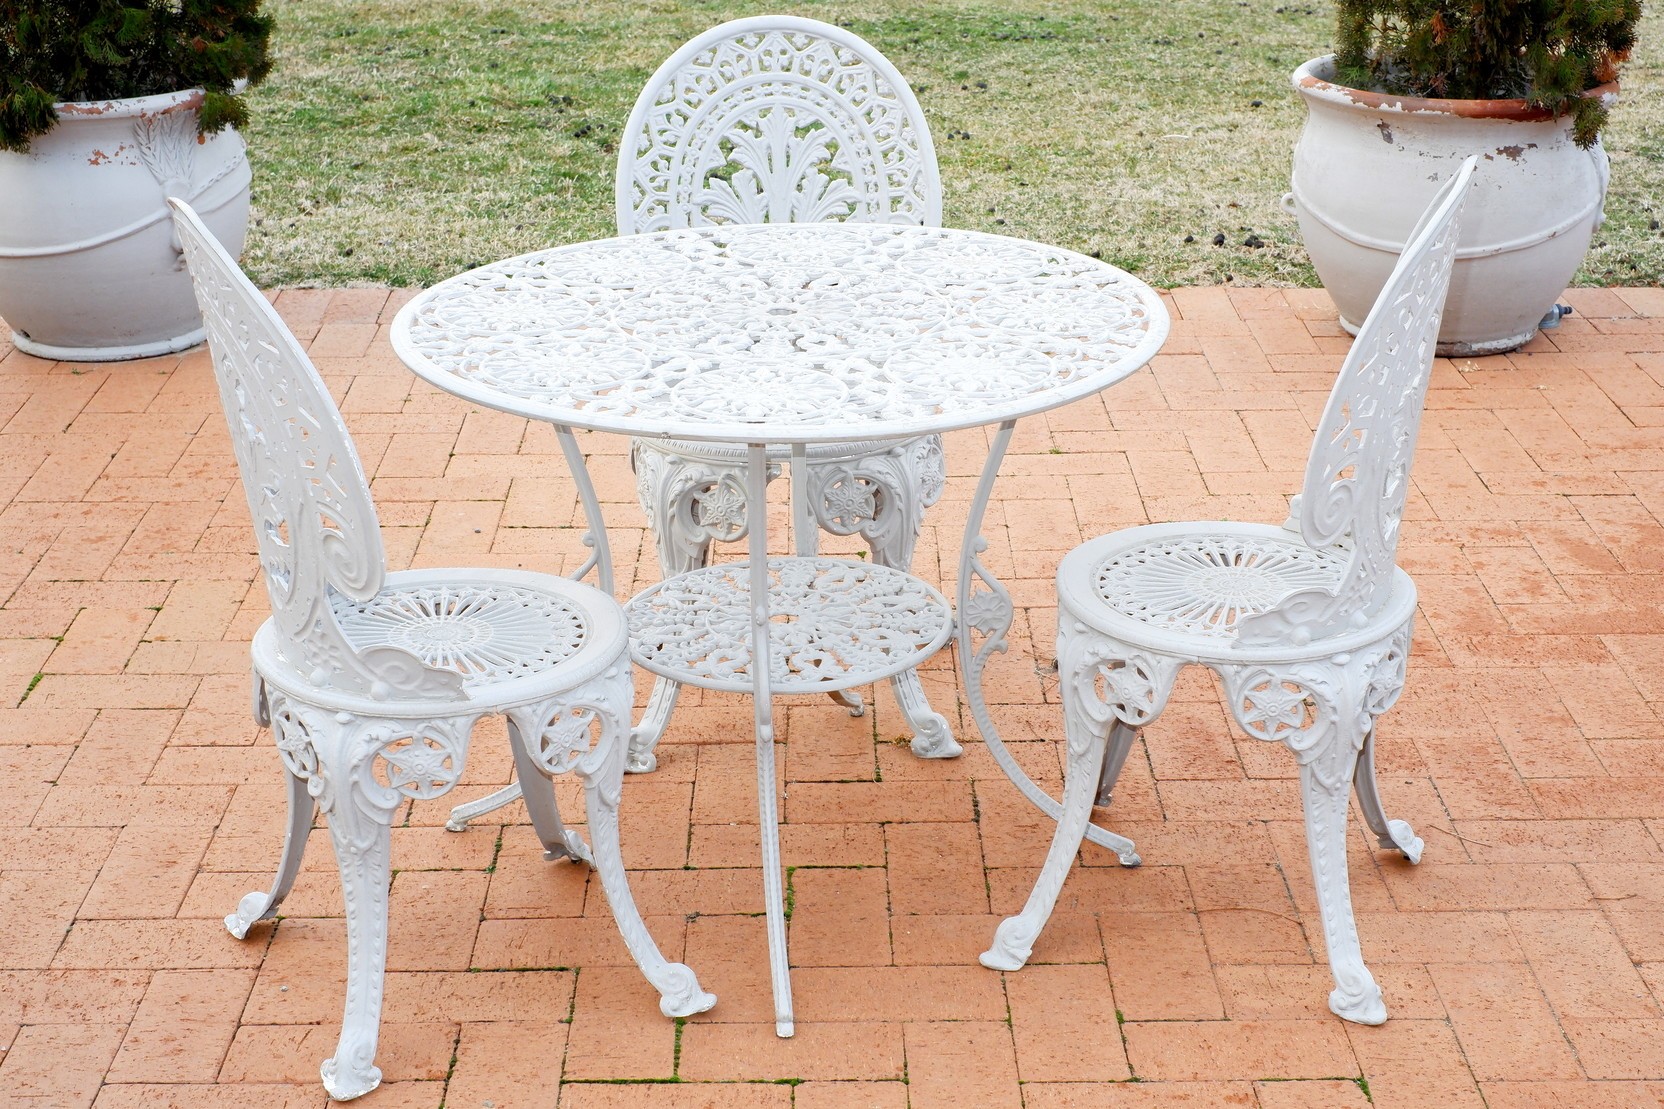 'Vintage Cast Metal Alloy Outdoor Setting'